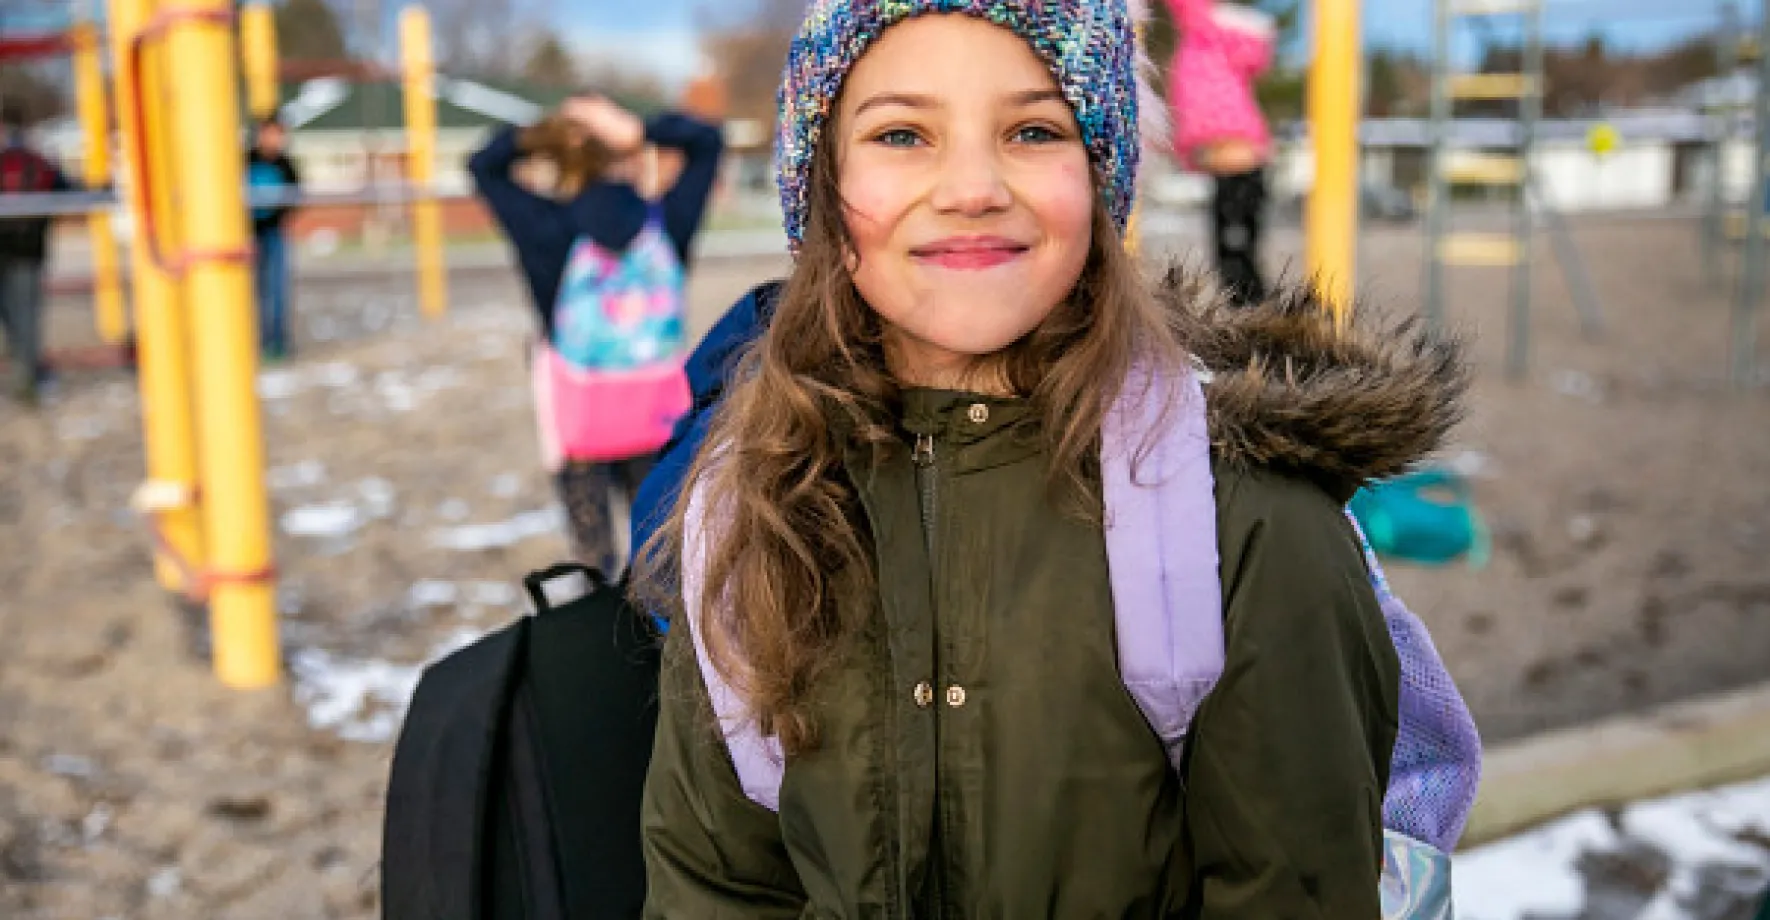 A girl in a beanie and coat smiles on her school playground.